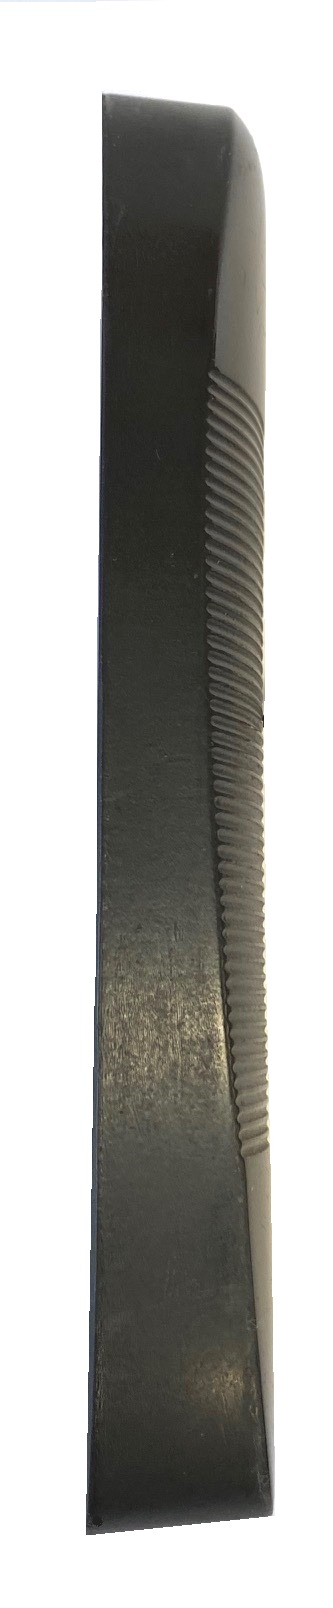 Serrated Buttplate - 20mm Thick  G-201-020